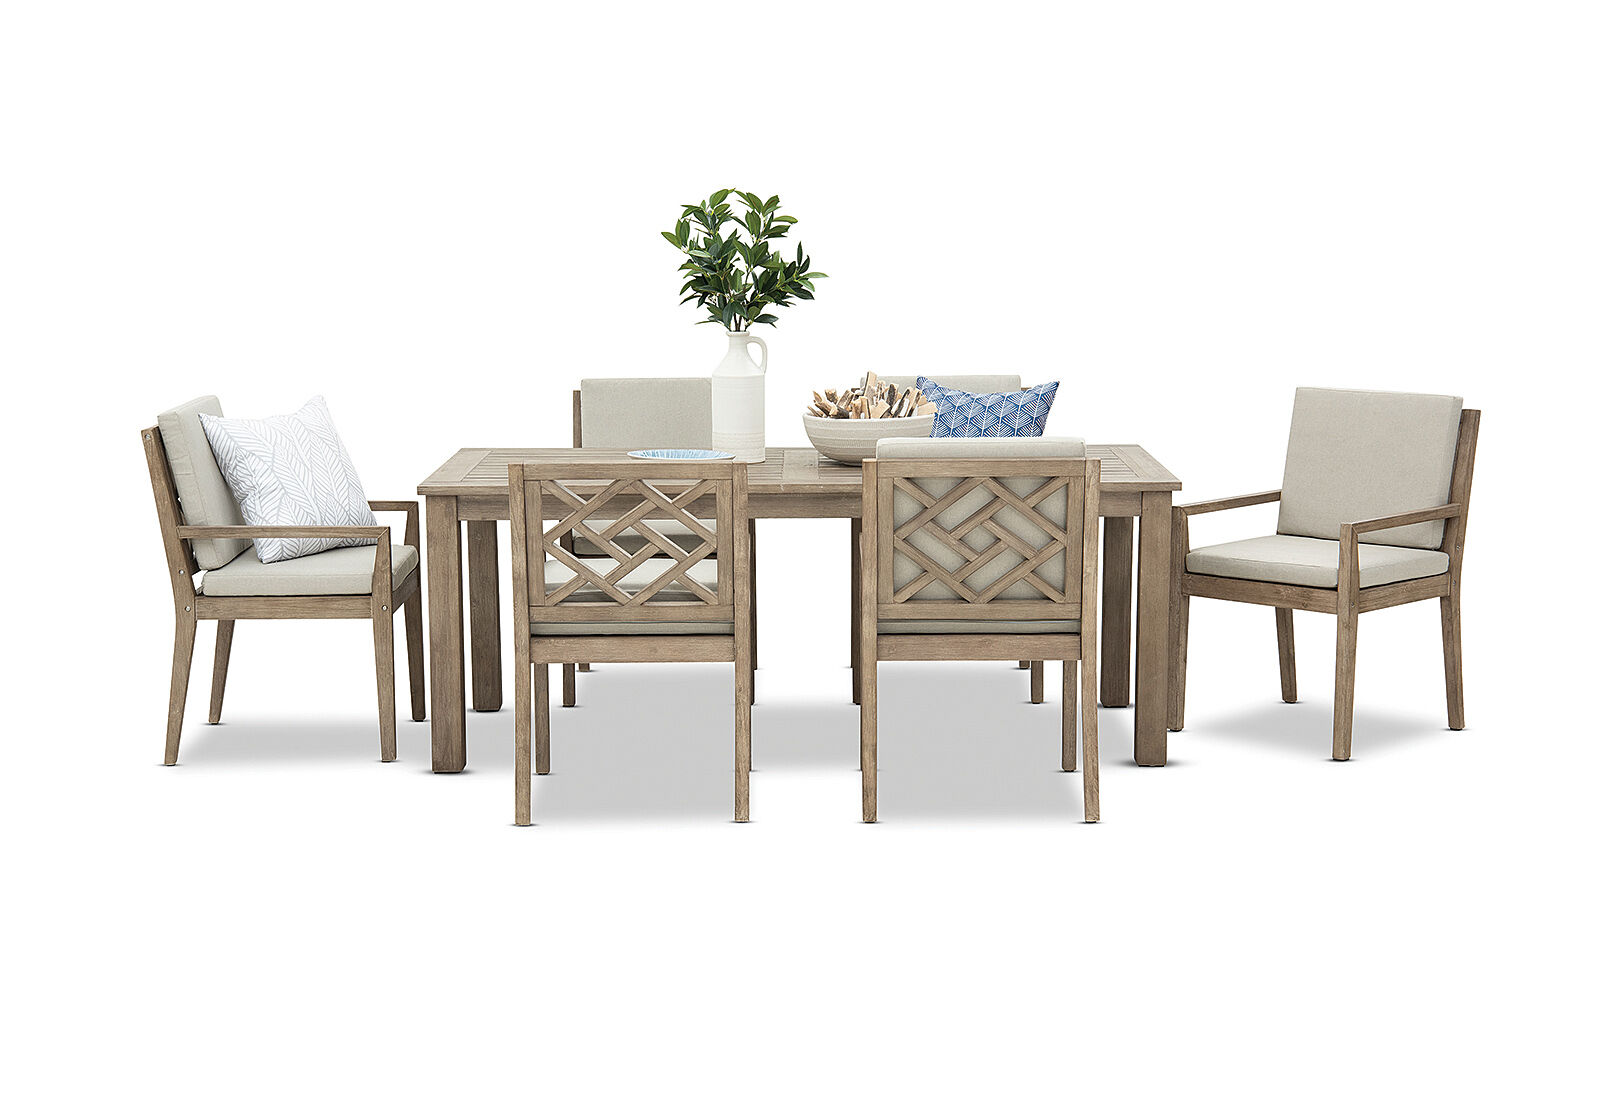 Weather Grey Lillian 7 Piece Outdoor, Piece Resin Wicker Patio Dining Sets